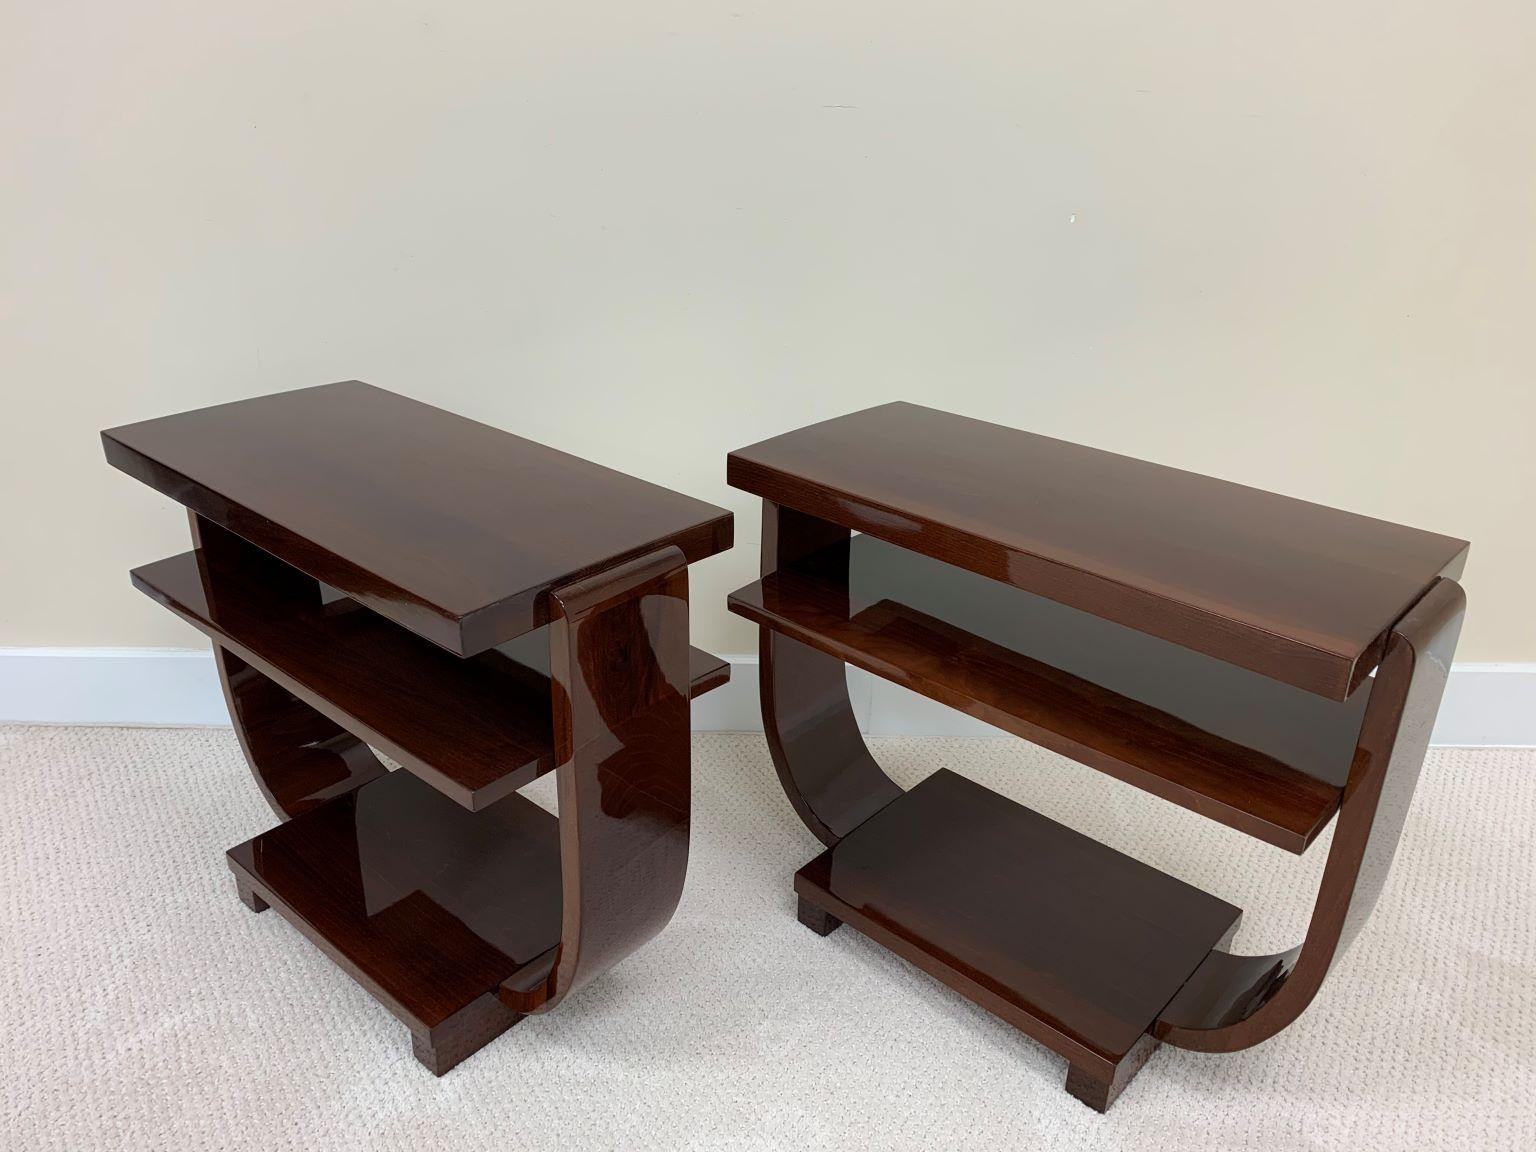 Pair of Art Deco Machine Age end tables made and retail by the Modernage Furniture Company. An elegant design with three shelves supported by a soft curving U. Perfectly restored in a walnut gloss finish. Height 22 Width 12 Length